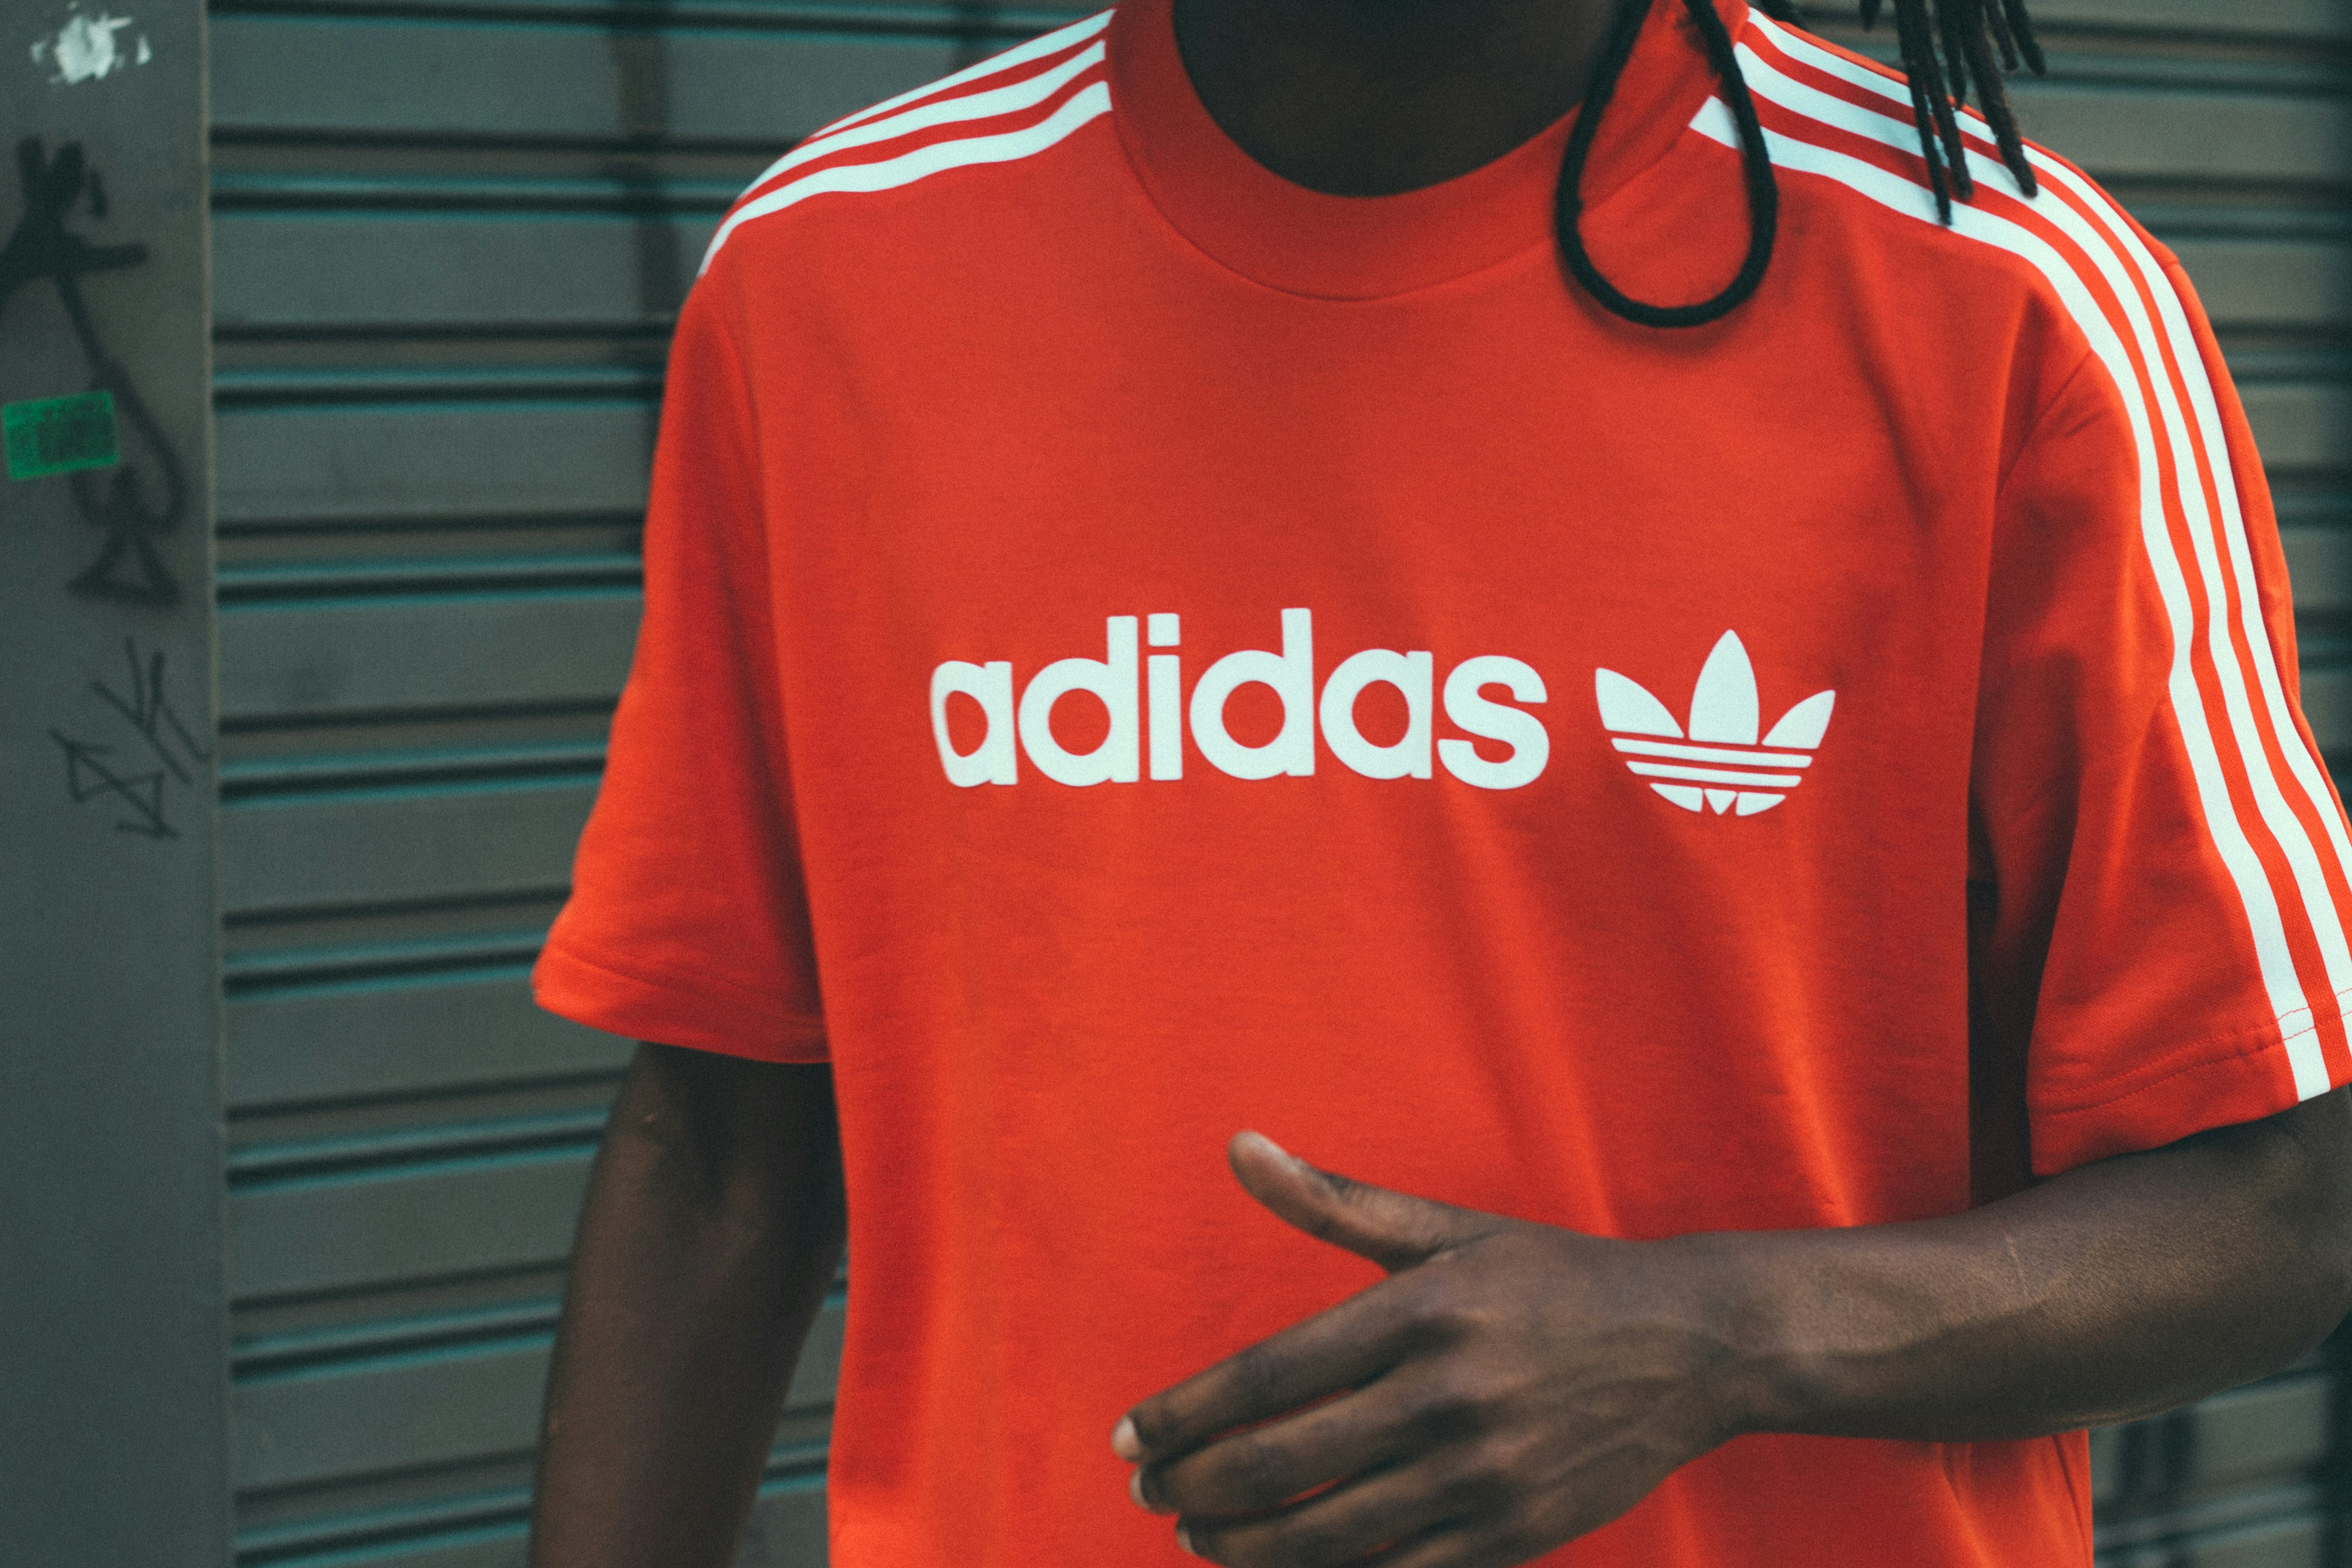 white adidas shirt with red logo